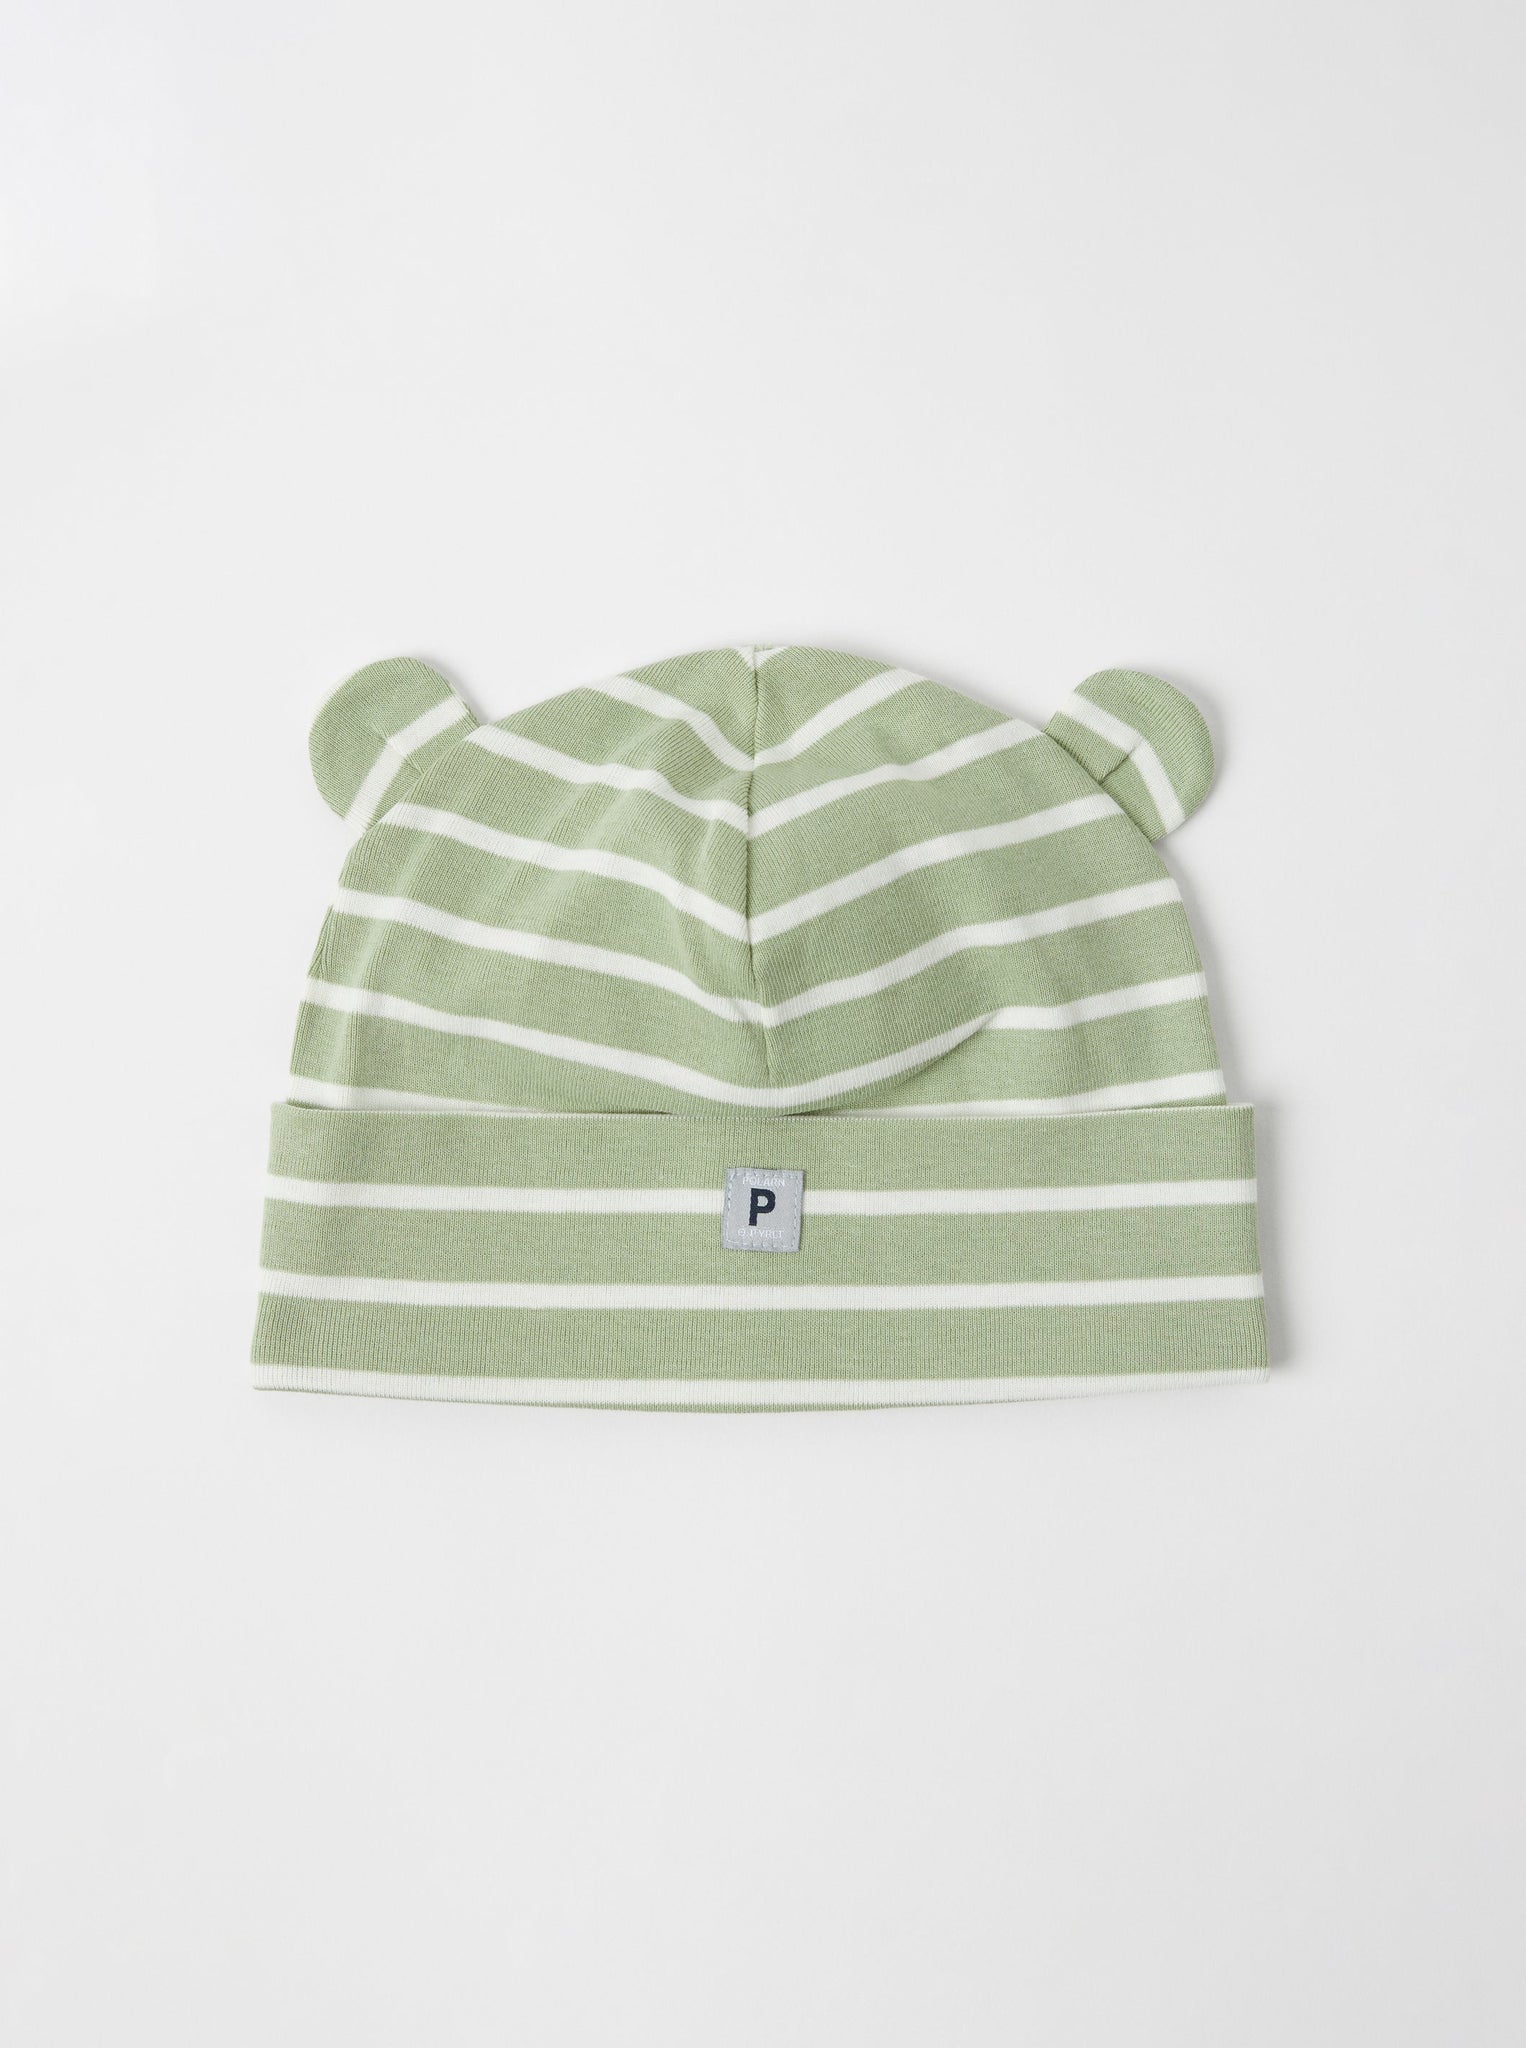 Organic Cotton Green Baby Beanie Hat from the Polarn O. Pyret babywear collection. The best ethical baby clothes